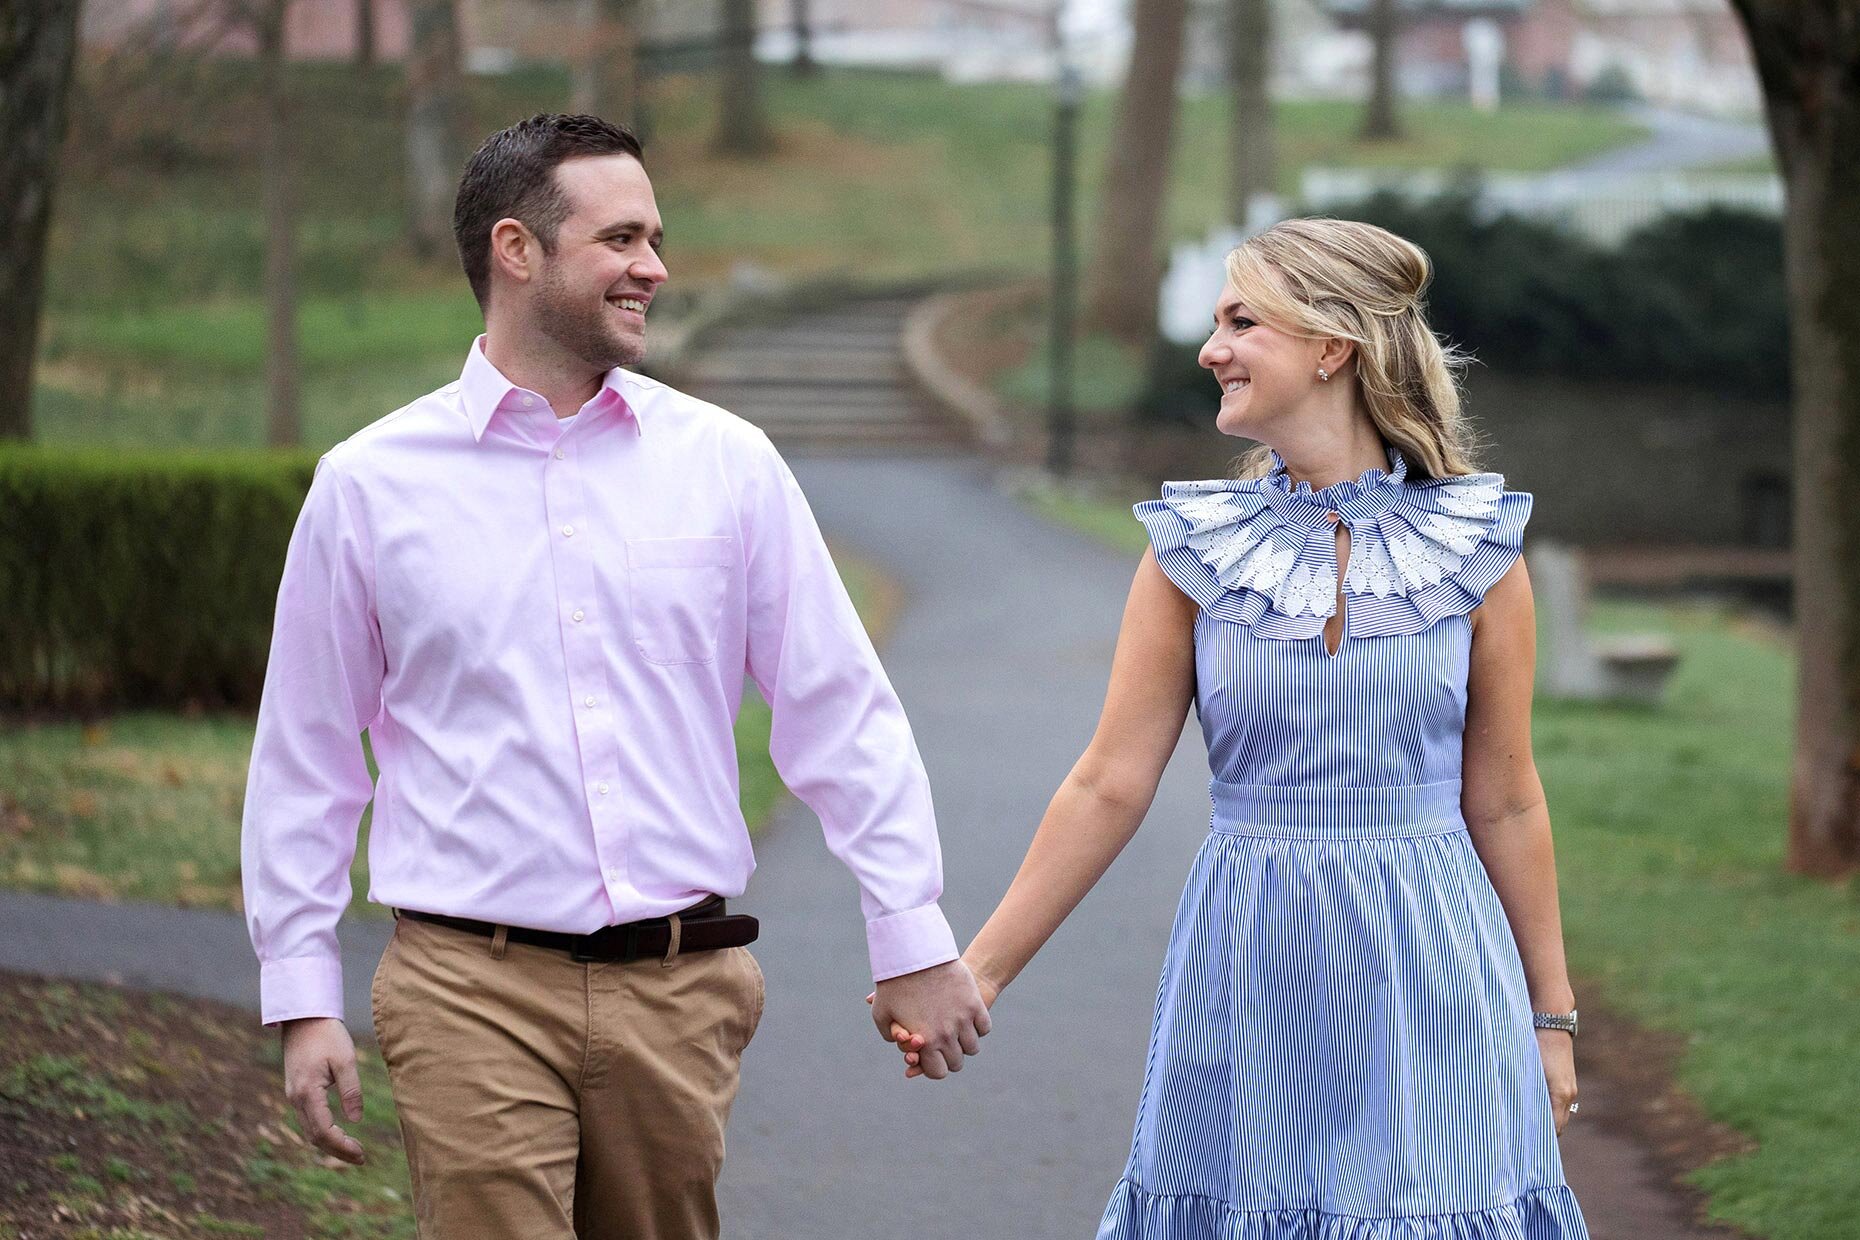 Brianne & Andrew walking hand in hand at Lititz Springs Park, Lititz, PA